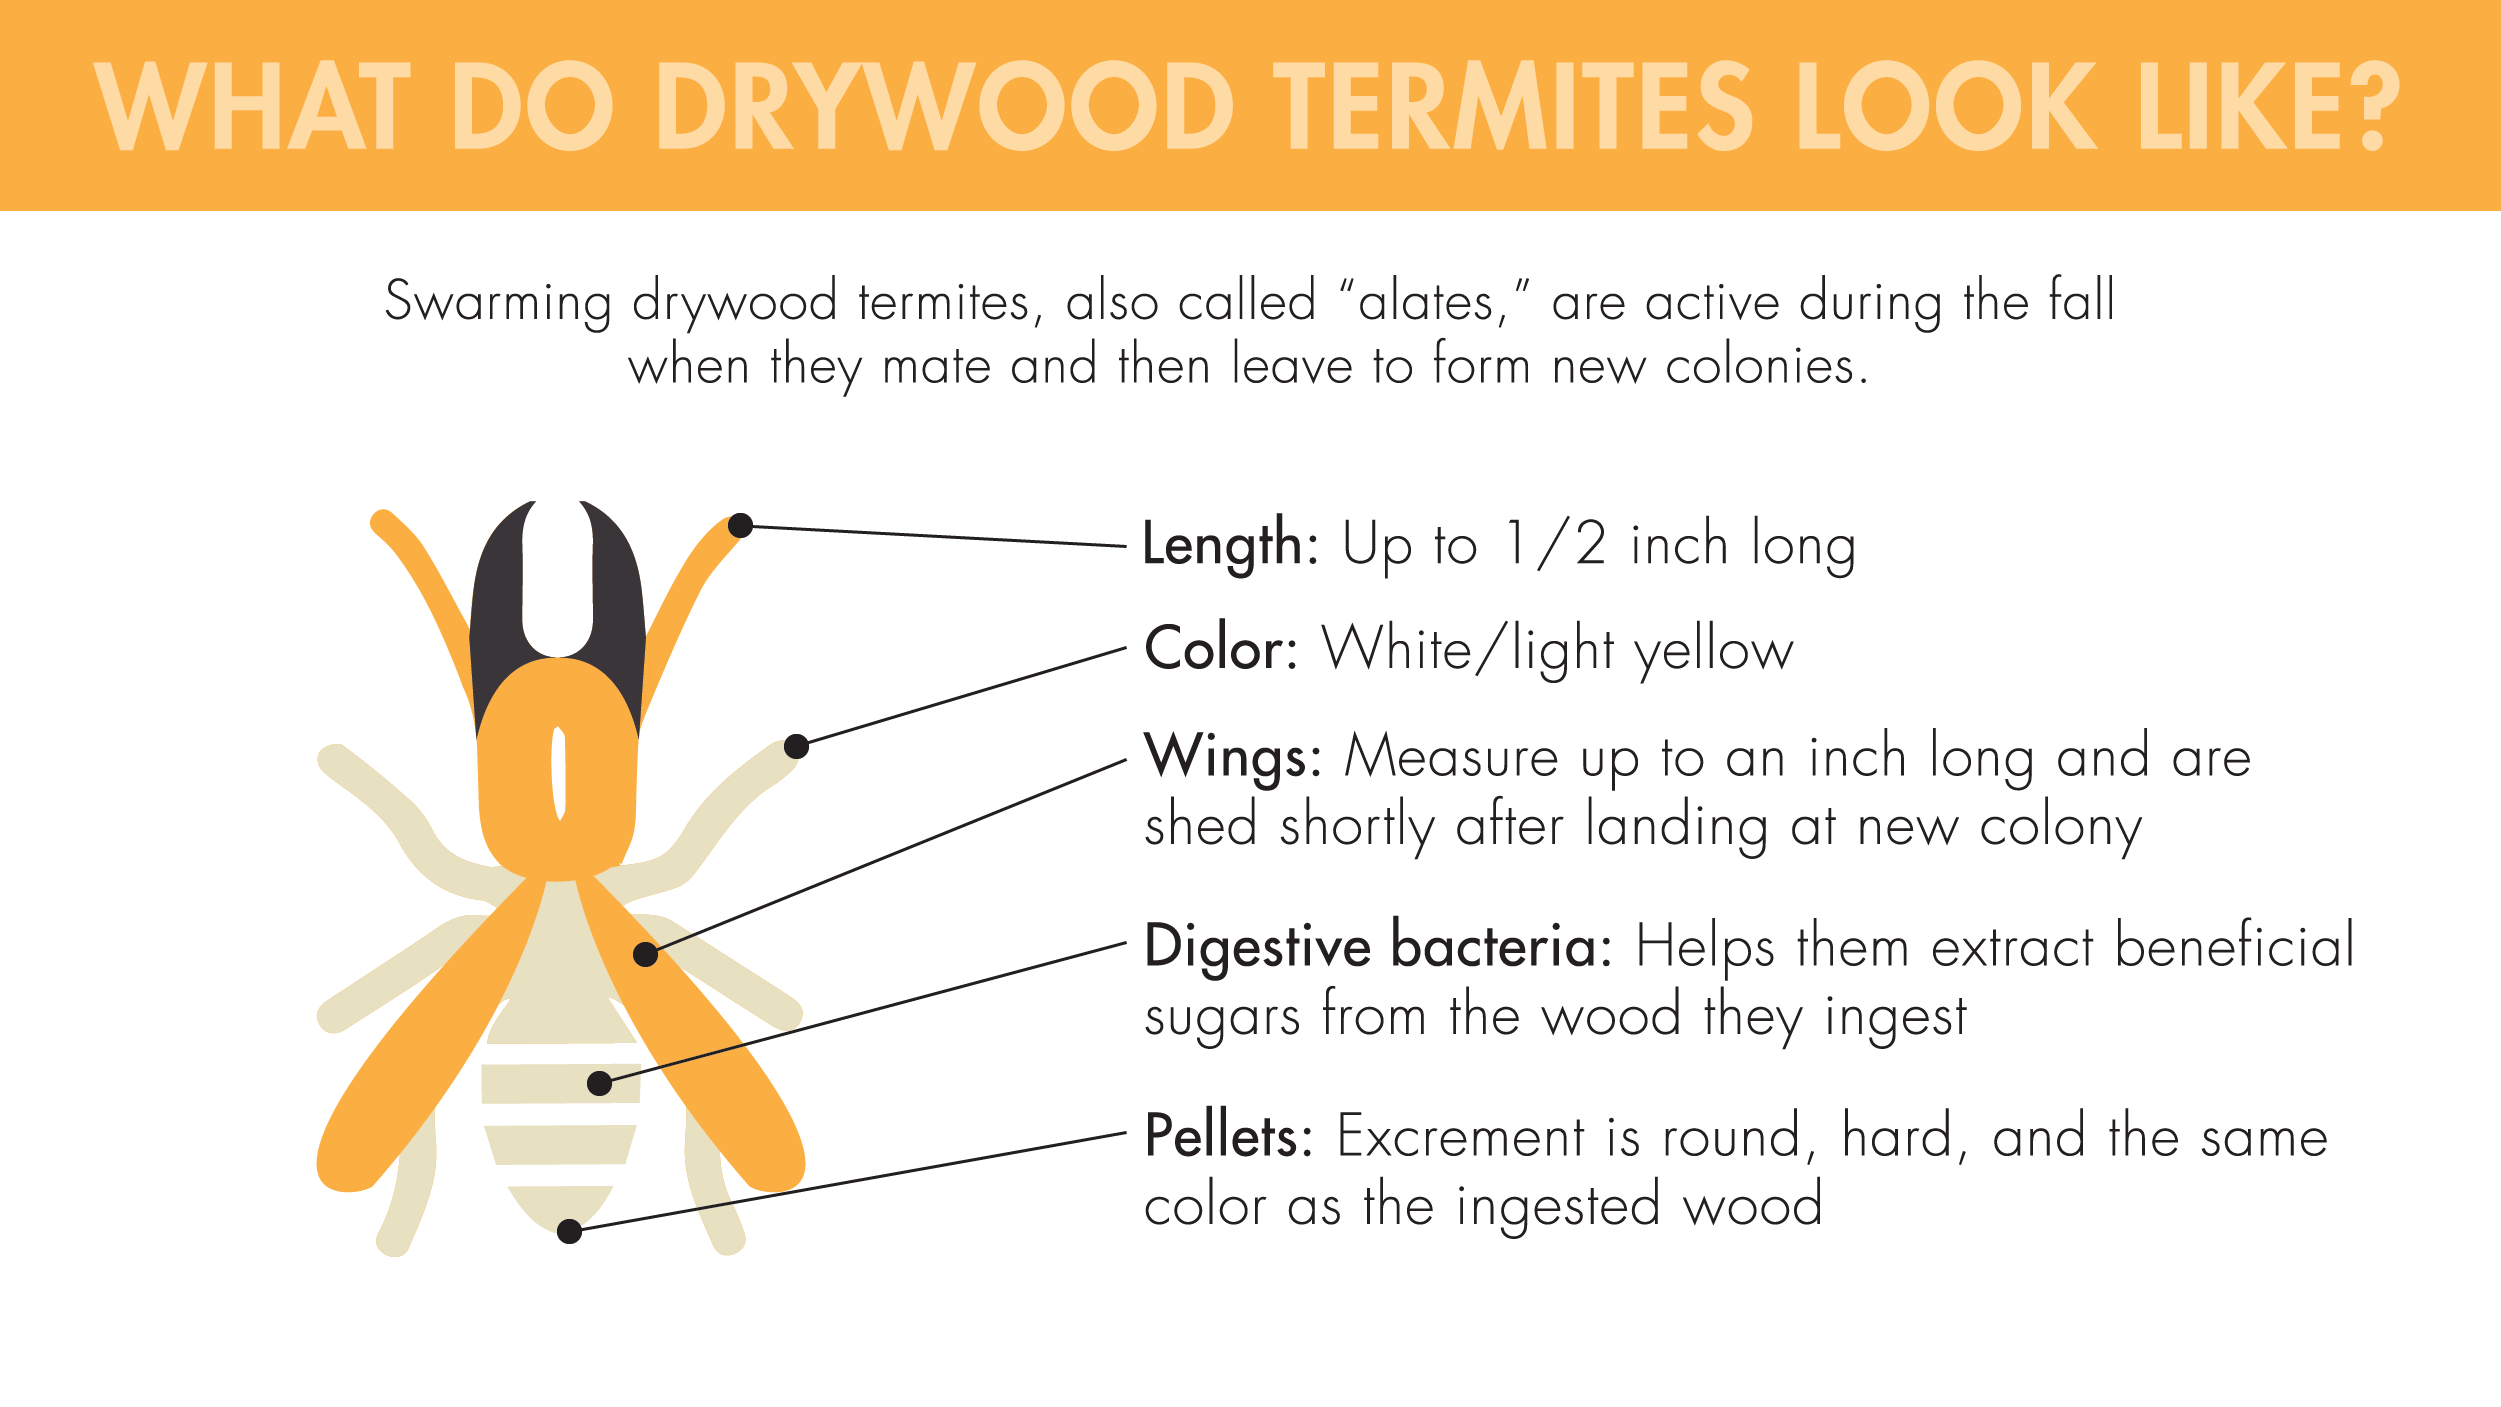 Swarming drywood termites, also called "alates," are active during the fall when they mate and then leave to form new colonies. They're up to 1/2-inch long, are a white/light yellow color, have wings that shed shortly after landing at a new colony, extract beneficial sugars from the wood they ingest with digestive bacteria, and excrete round, hard, wood-colored pellets.